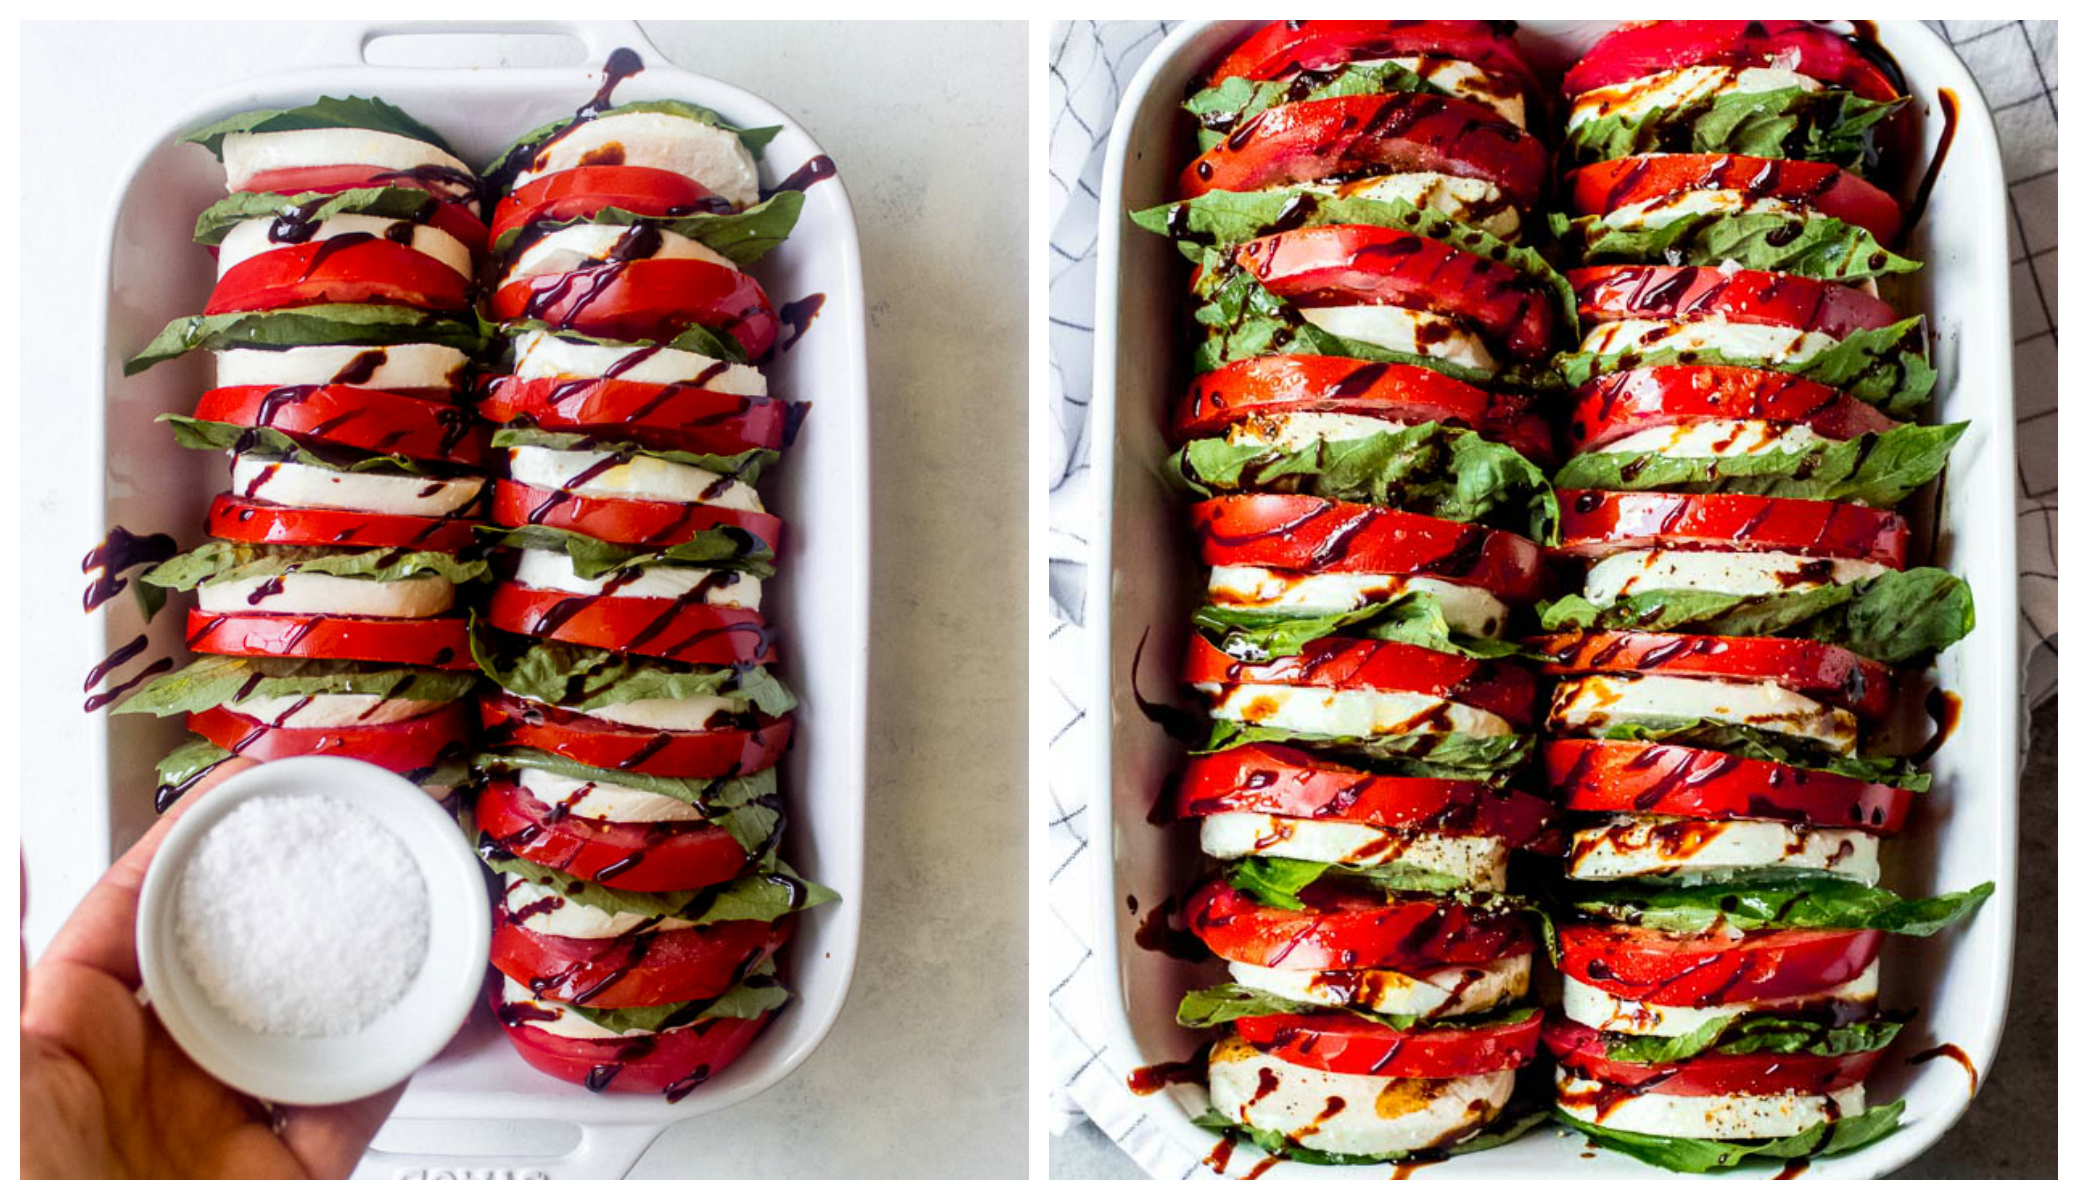 Step by step on how to make fresh mozzarella salad with tomatoes and basil